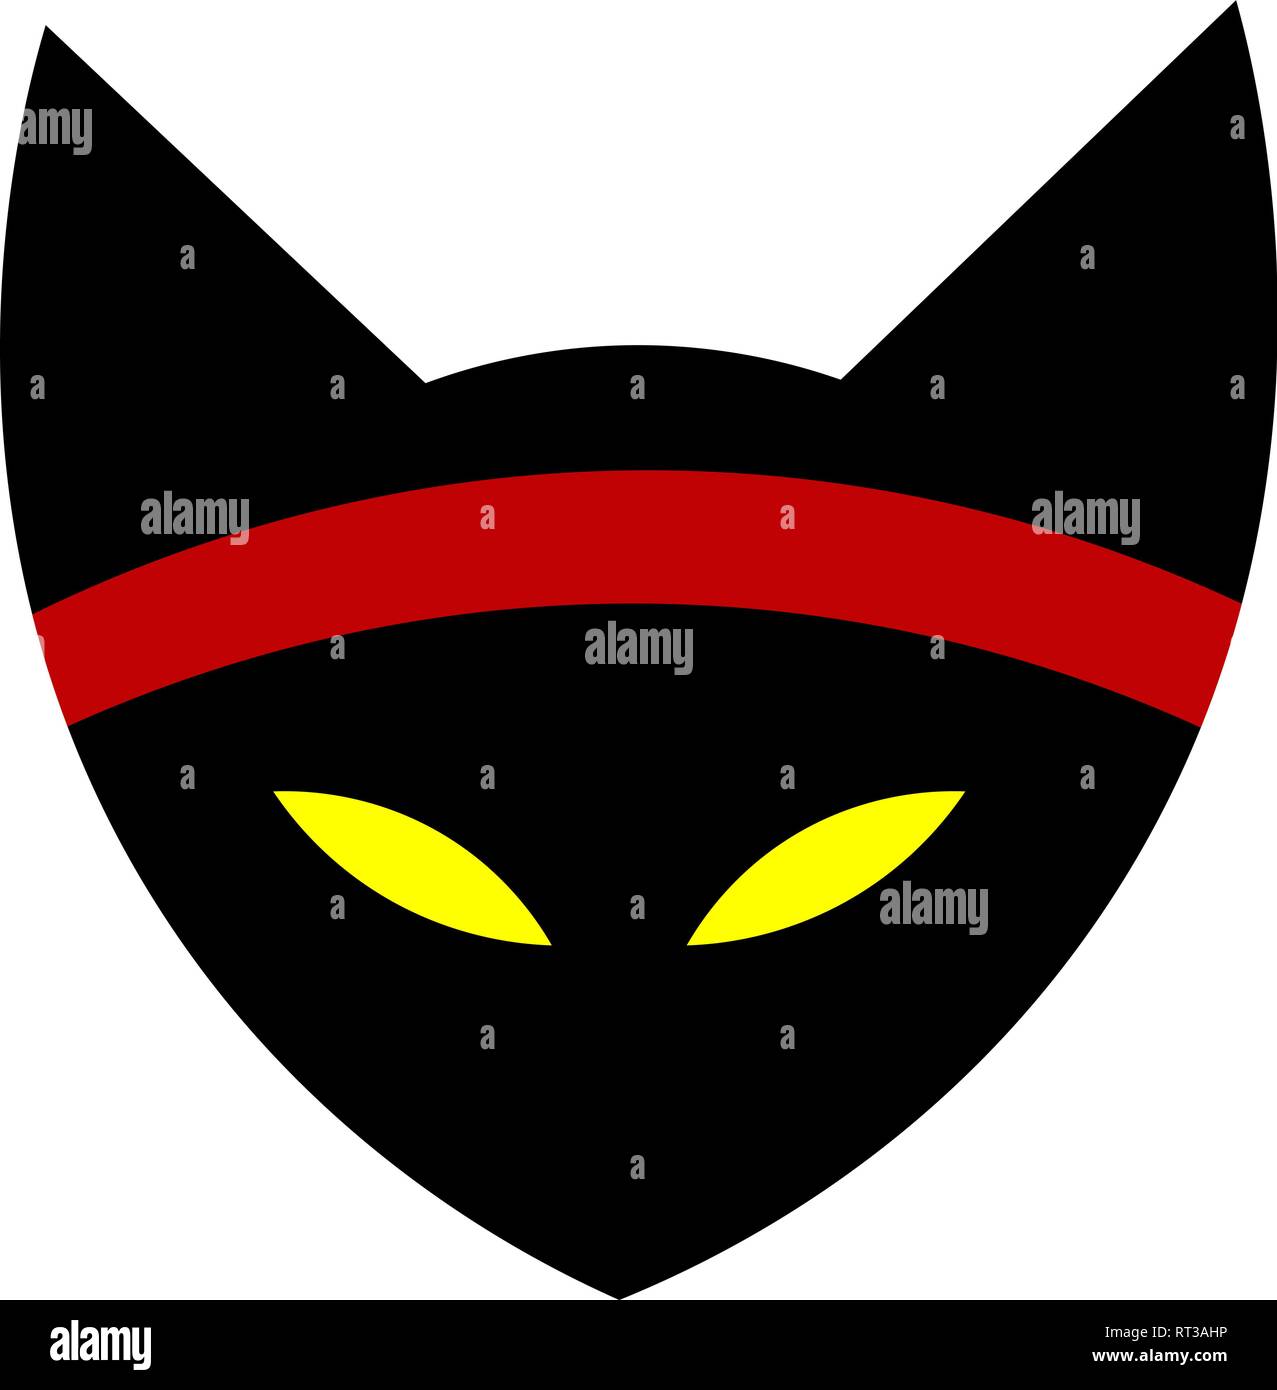 Japanese Cat Mask - Black and Red